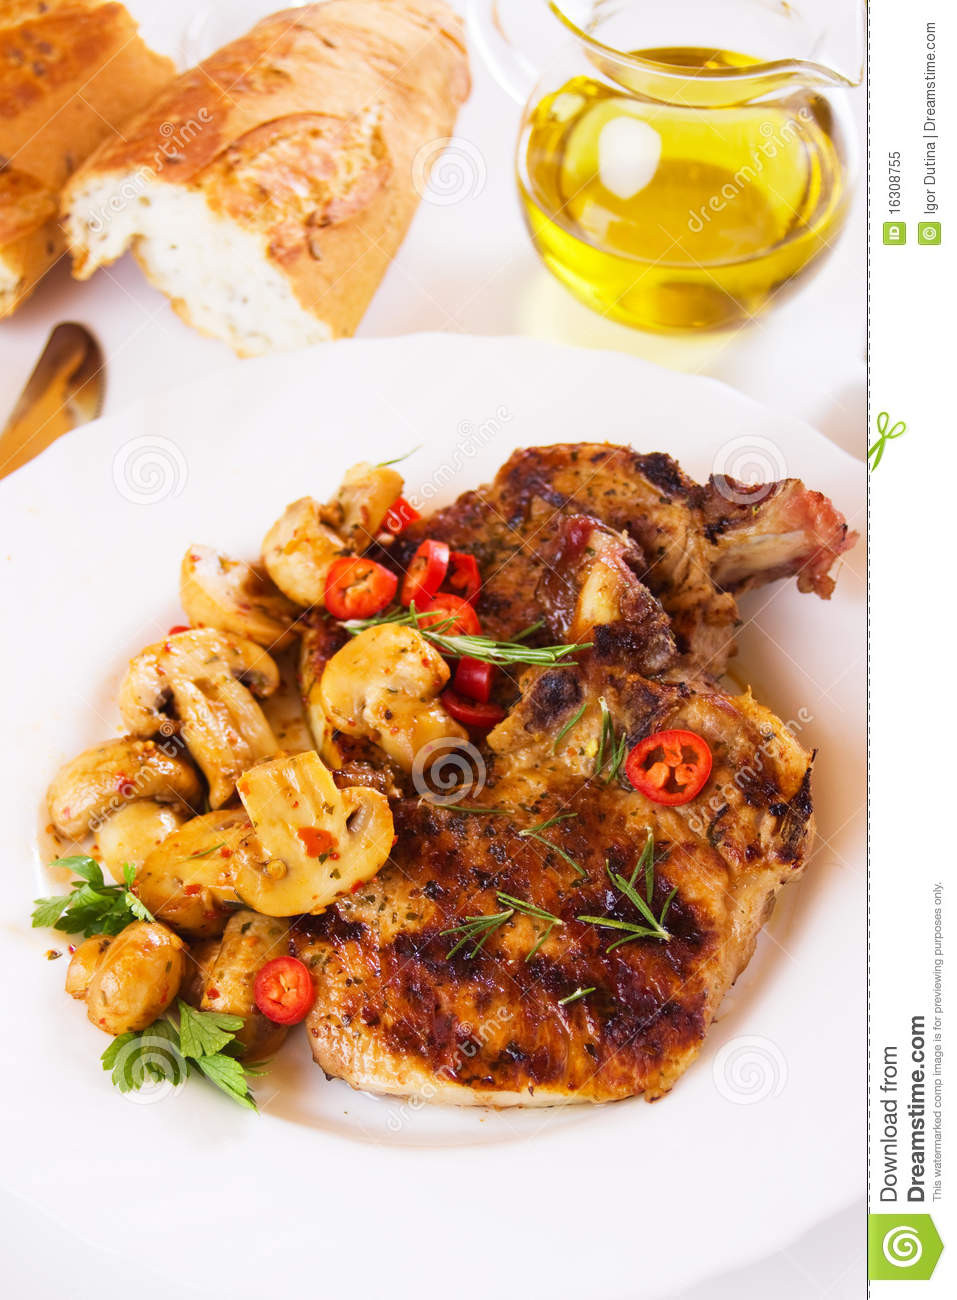 Grilled Pork Loin Chops
 Grilled pork loin chops stock image Image of grilled